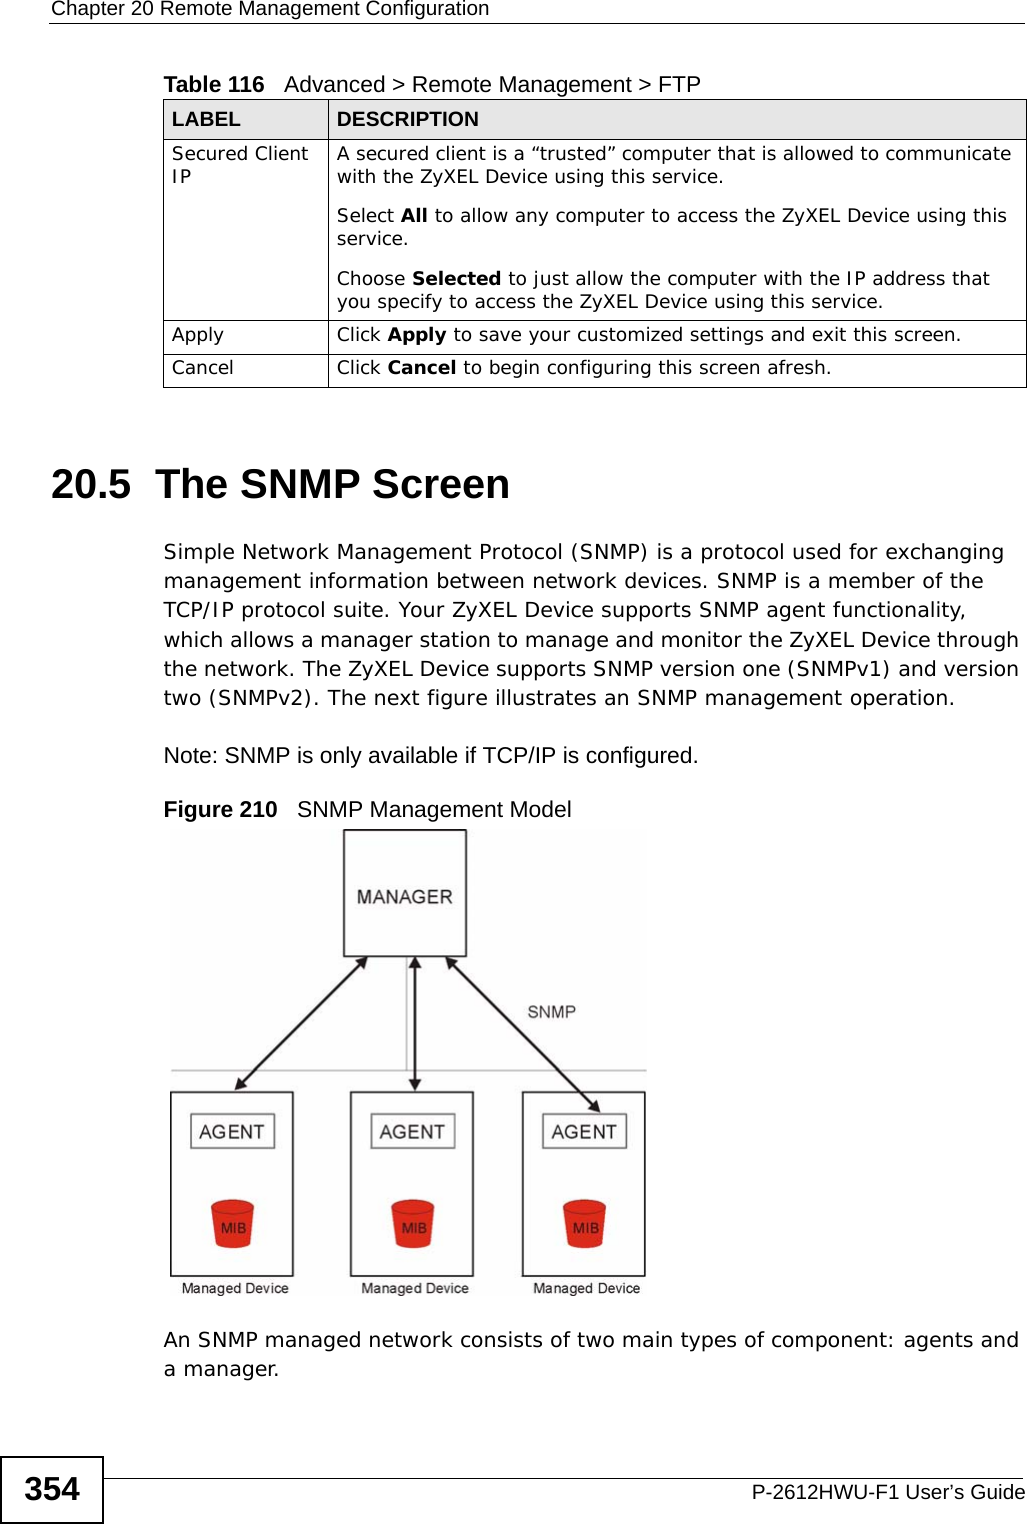 Chapter 20 Remote Management ConfigurationP-2612HWU-F1 User’s Guide35420.5  The SNMP Screen Simple Network Management Protocol (SNMP) is a protocol used for exchanging management information between network devices. SNMP is a member of the TCP/IP protocol suite. Your ZyXEL Device supports SNMP agent functionality, which allows a manager station to manage and monitor the ZyXEL Device through the network. The ZyXEL Device supports SNMP version one (SNMPv1) and version two (SNMPv2). The next figure illustrates an SNMP management operation.Note: SNMP is only available if TCP/IP is configured.Figure 210   SNMP Management ModelAn SNMP managed network consists of two main types of component: agents and a manager. Secured Client IP A secured client is a “trusted” computer that is allowed to communicate with the ZyXEL Device using this service. Select All to allow any computer to access the ZyXEL Device using this service.Choose Selected to just allow the computer with the IP address that you specify to access the ZyXEL Device using this service.Apply Click Apply to save your customized settings and exit this screen. Cancel Click Cancel to begin configuring this screen afresh.Table 116   Advanced &gt; Remote Management &gt; FTPLABEL DESCRIPTION